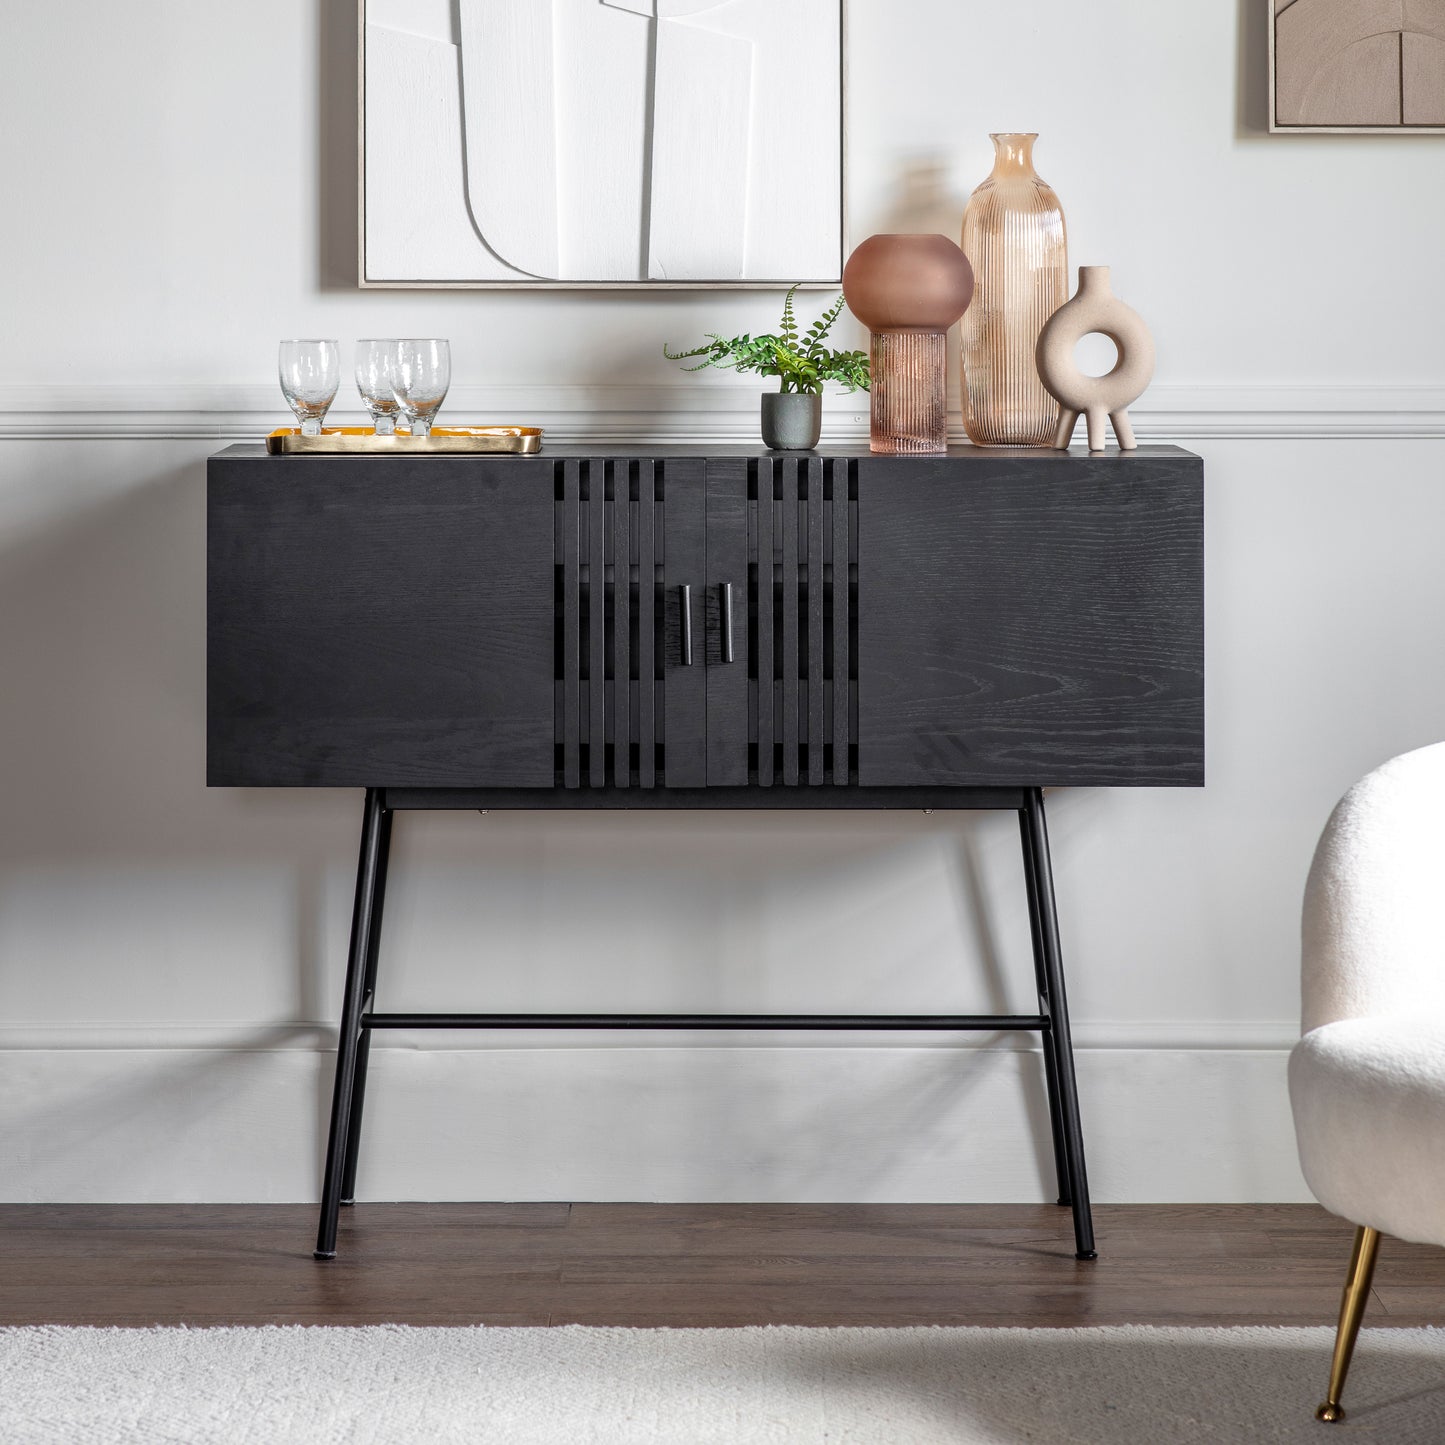 A black Holston 2 Door Sideboard from Kikiathome.co.uk in a room with a chair and a vase, adding to the home furniture and interior decor.